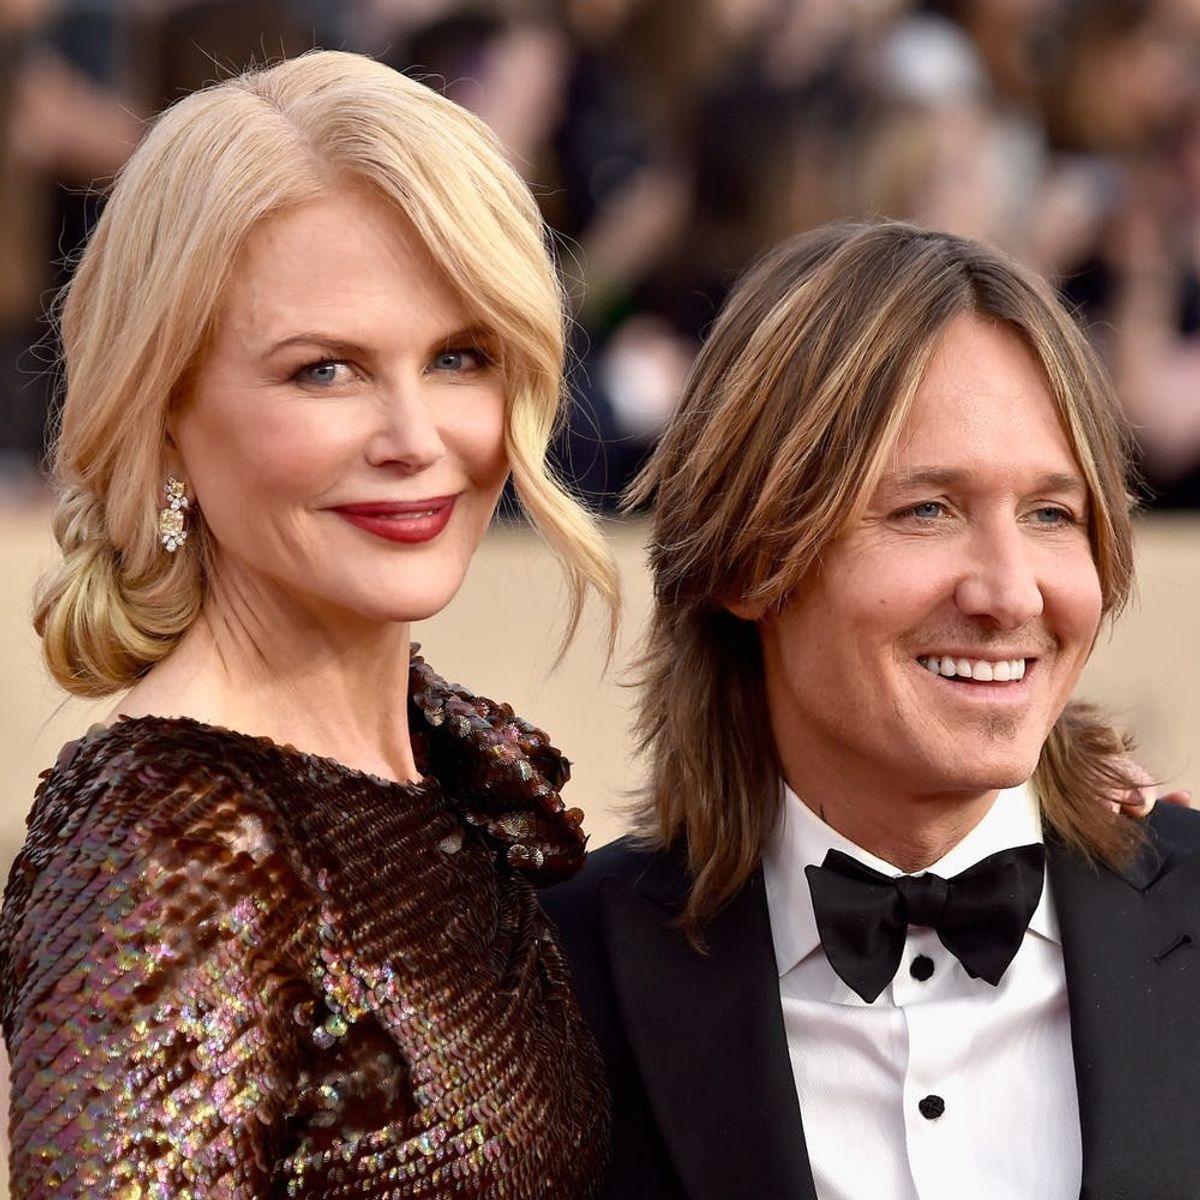 Nicole Kidman and Keith Urban Have ‘Never Texted’ Each Other